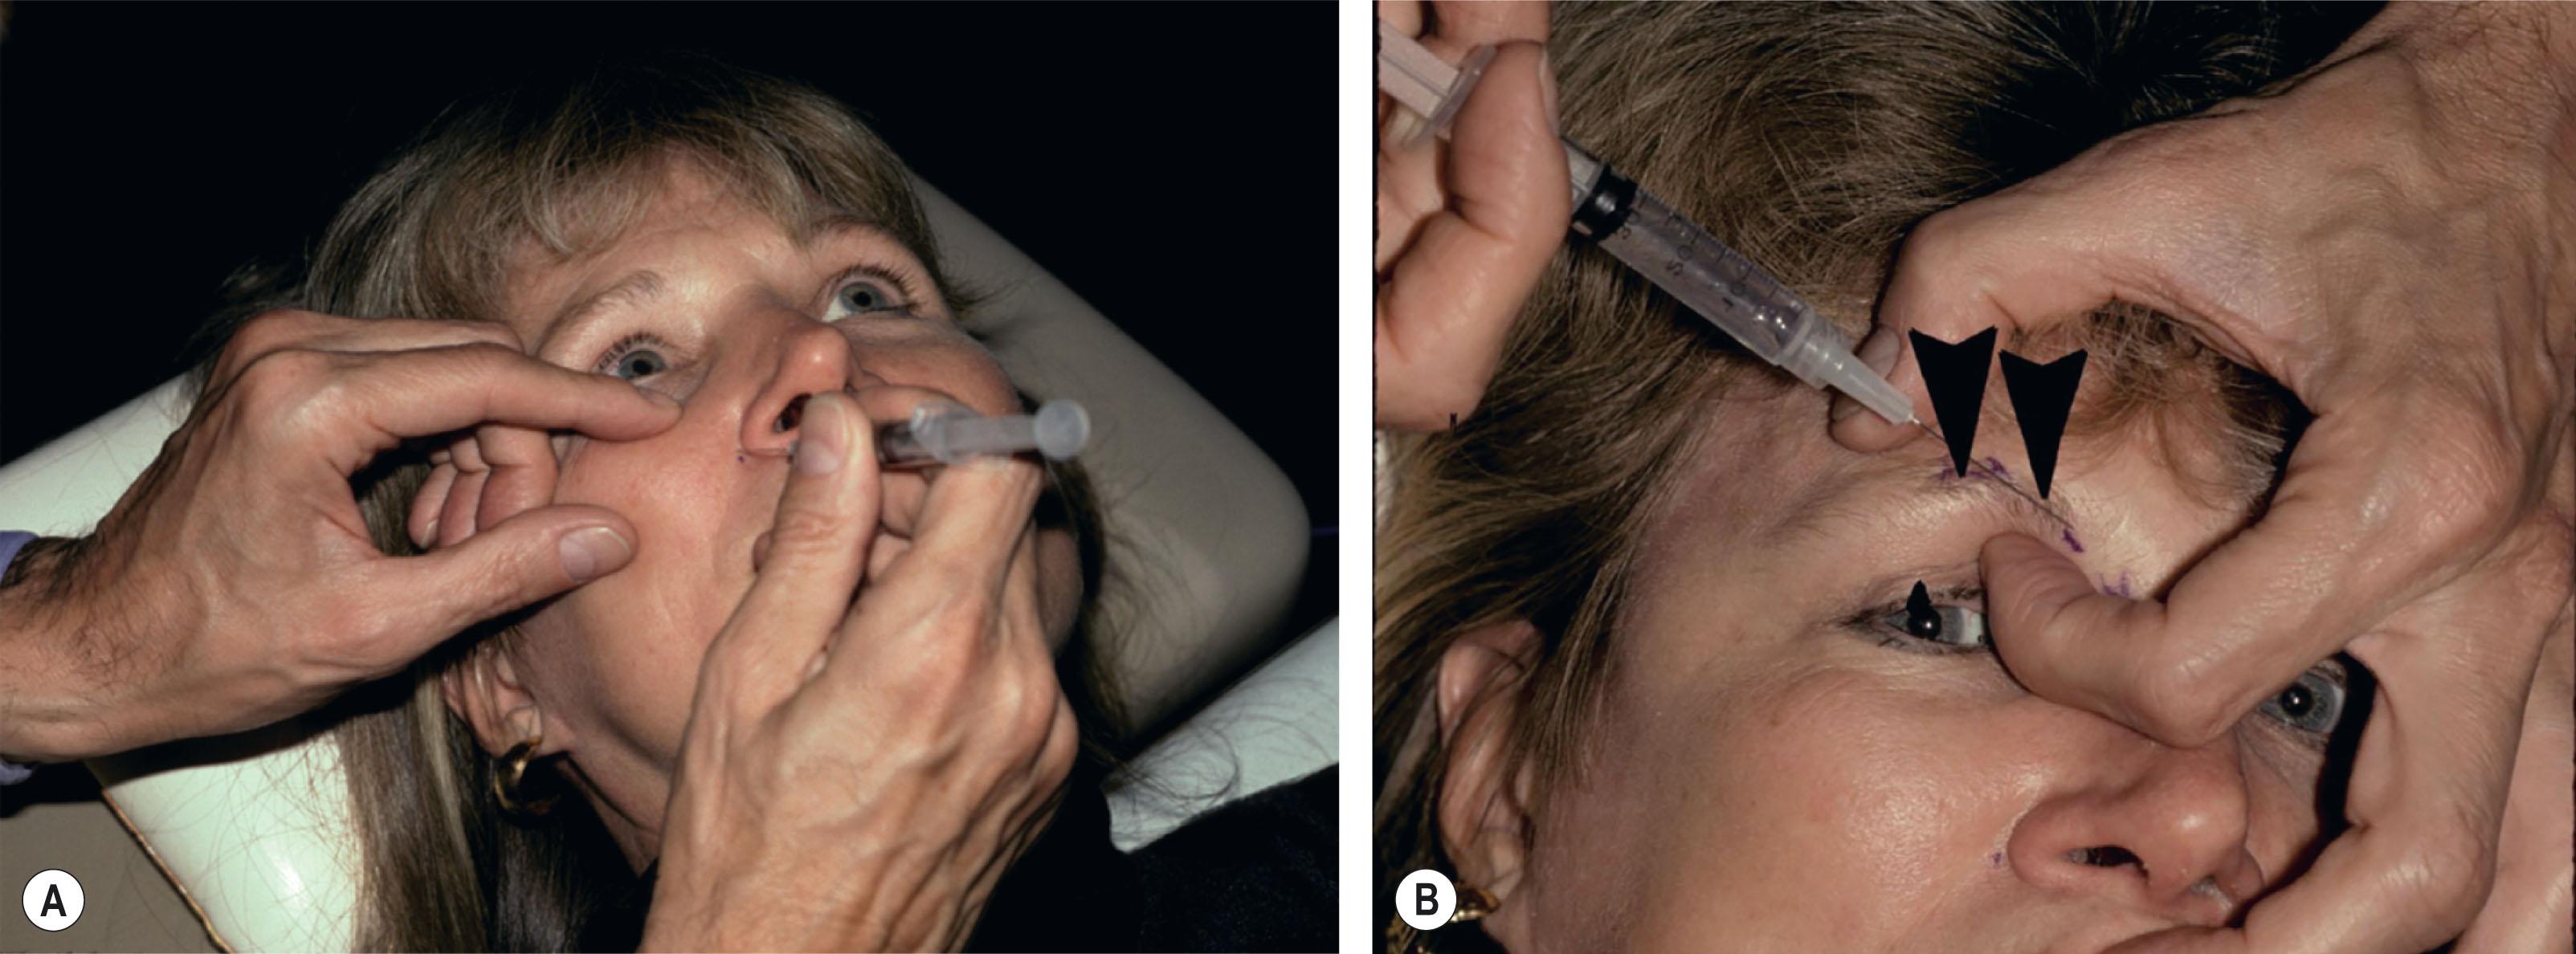 Figure 5.3, The author’s access for both the infraorbital and supraorbital, supratrochlear, and infratrochlear nerve blocks. (A) The ergonomic drip of the syringe, with the needle entering at the isthmus and positioned toward the infraorbital foramen. (B) The author’s finger protecting the globe and entering the medial third of the brow to block the supraorbital, supratrochlear, and infratrochlear nerves.